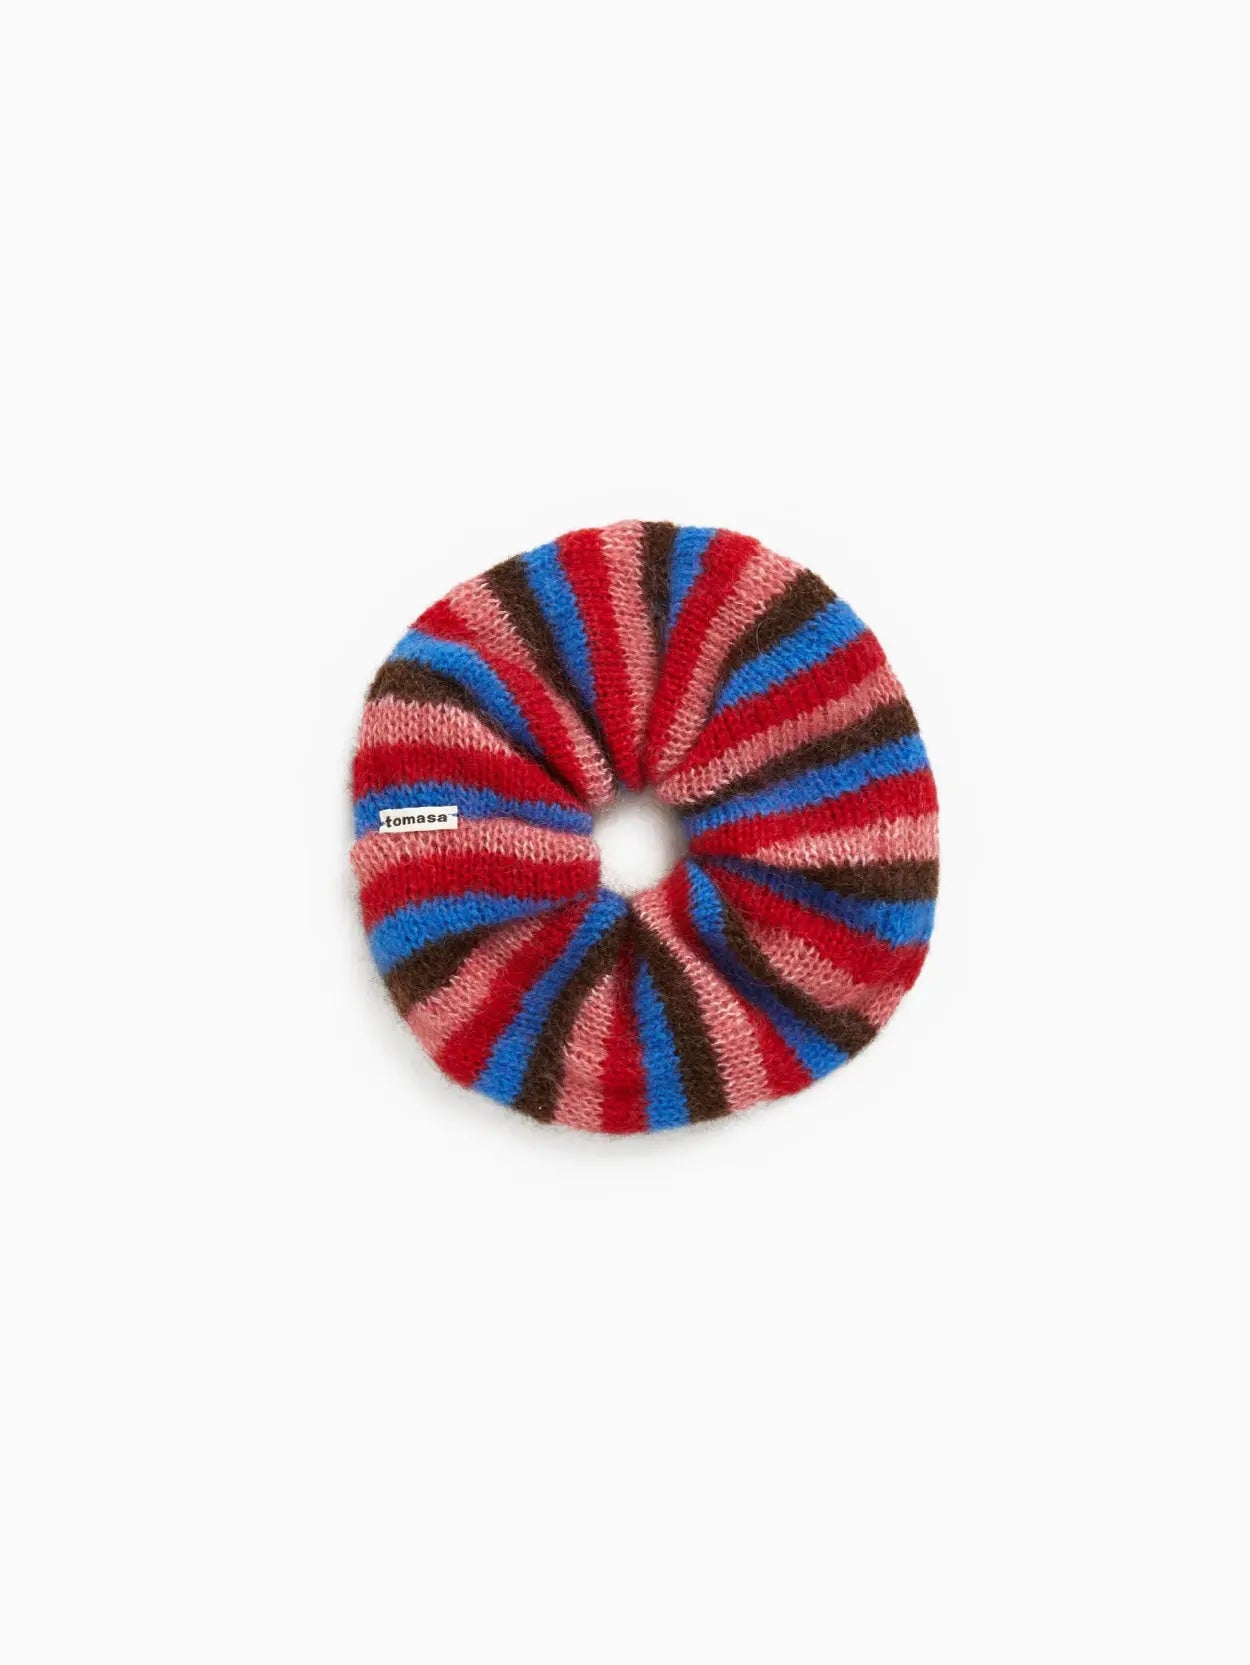 A round, knitted Mencia Scrunchie by Tomasa featuring alternating stripes of red, pink, blue, and brown. It has a small white label that reads "nanamica" sewn onto one of the red stripes. The scrunchie is displayed against a plain white background, available exclusively at Bassal Store in Barcelona.